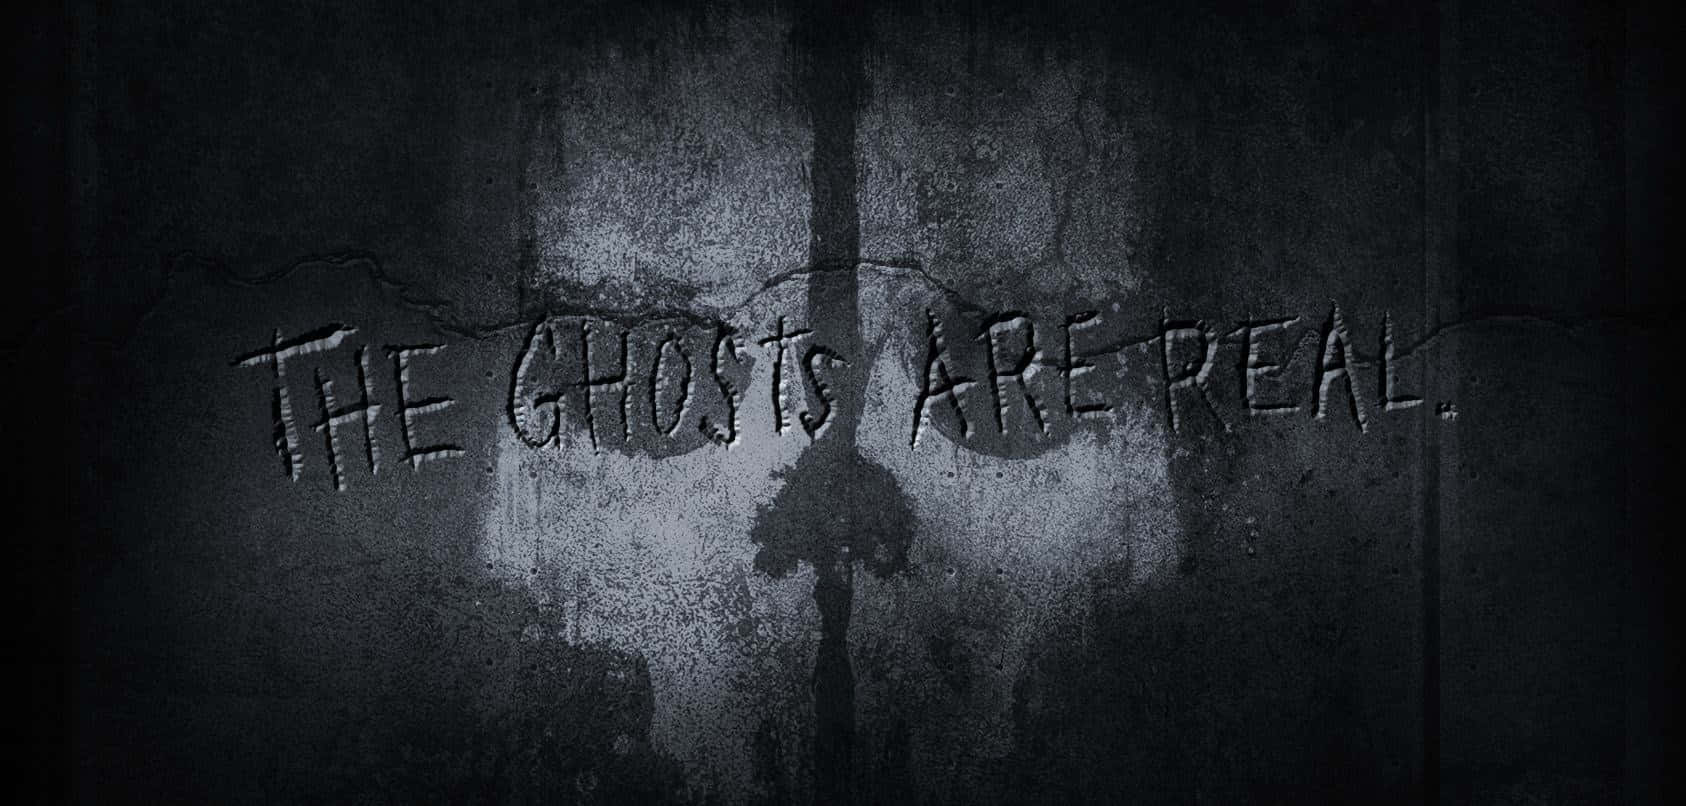 Call of Duty: Ghosts - Action Packed Combat Scene Wallpaper